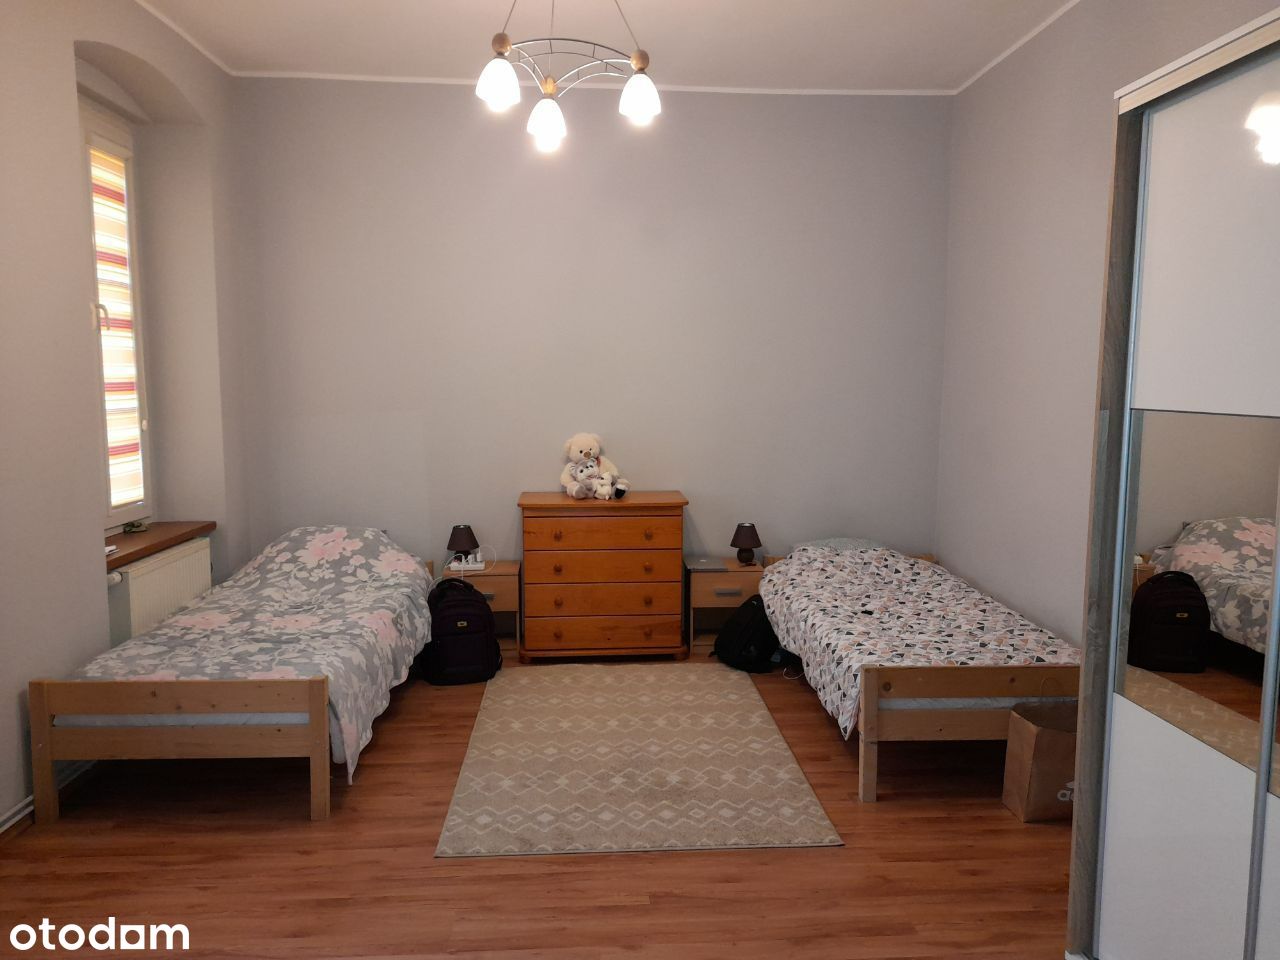 A room in a two-bedrooms flat is rented.